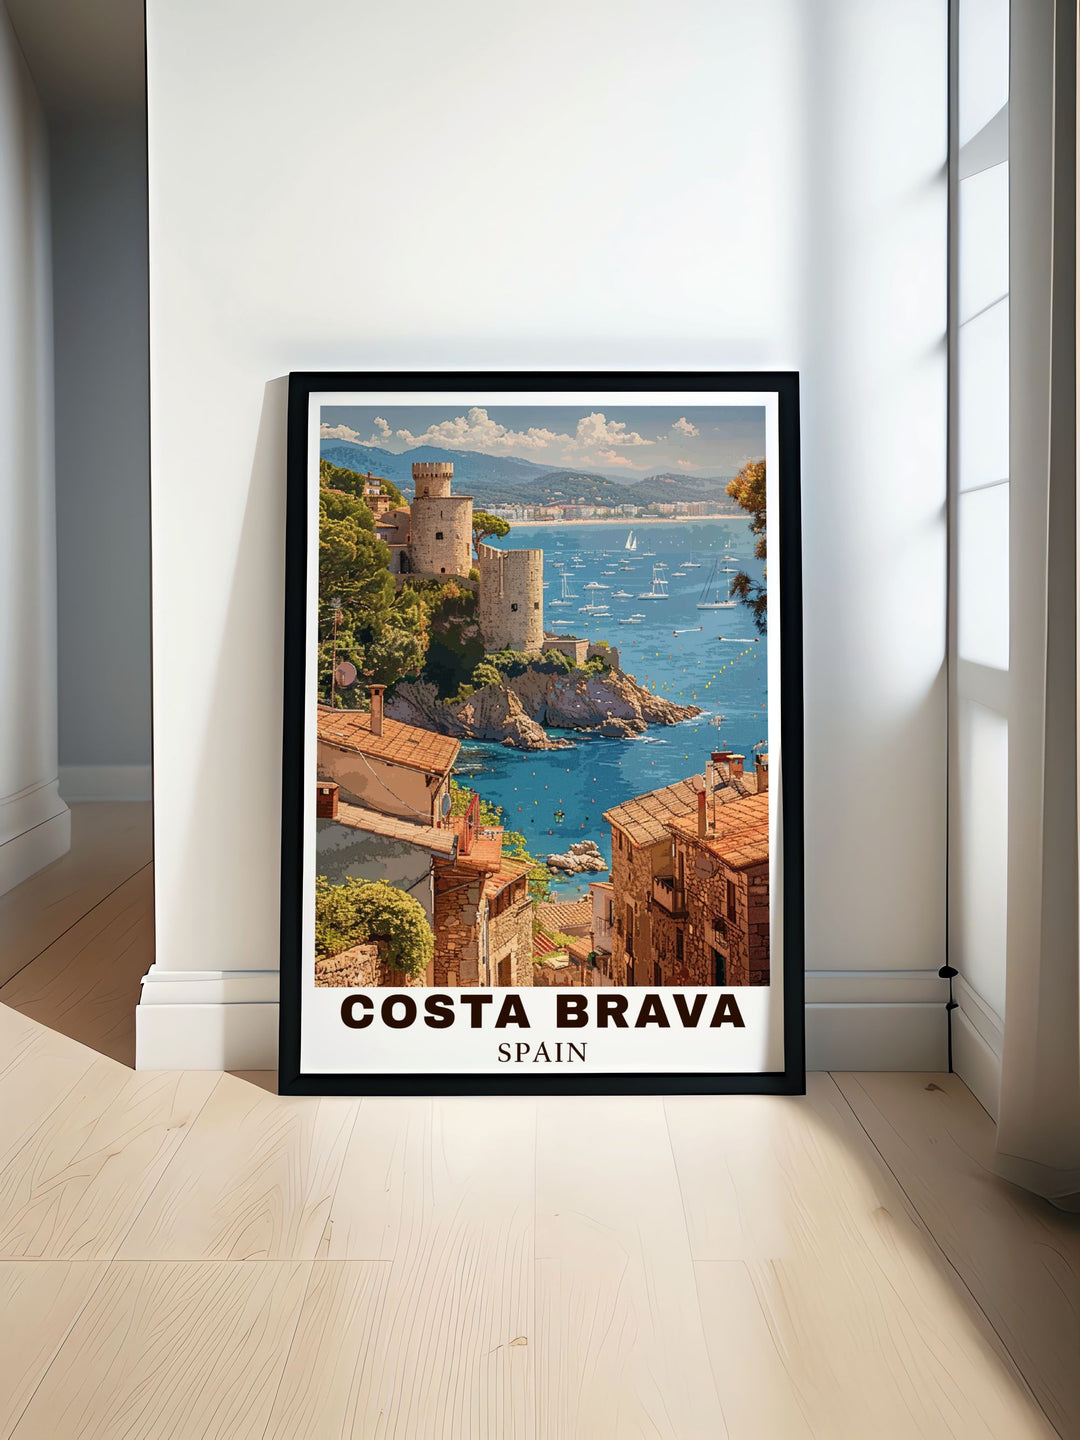 Experience the charm of Tossa de Mar with a vibrant art print showcasing its medieval castle and scenic views.